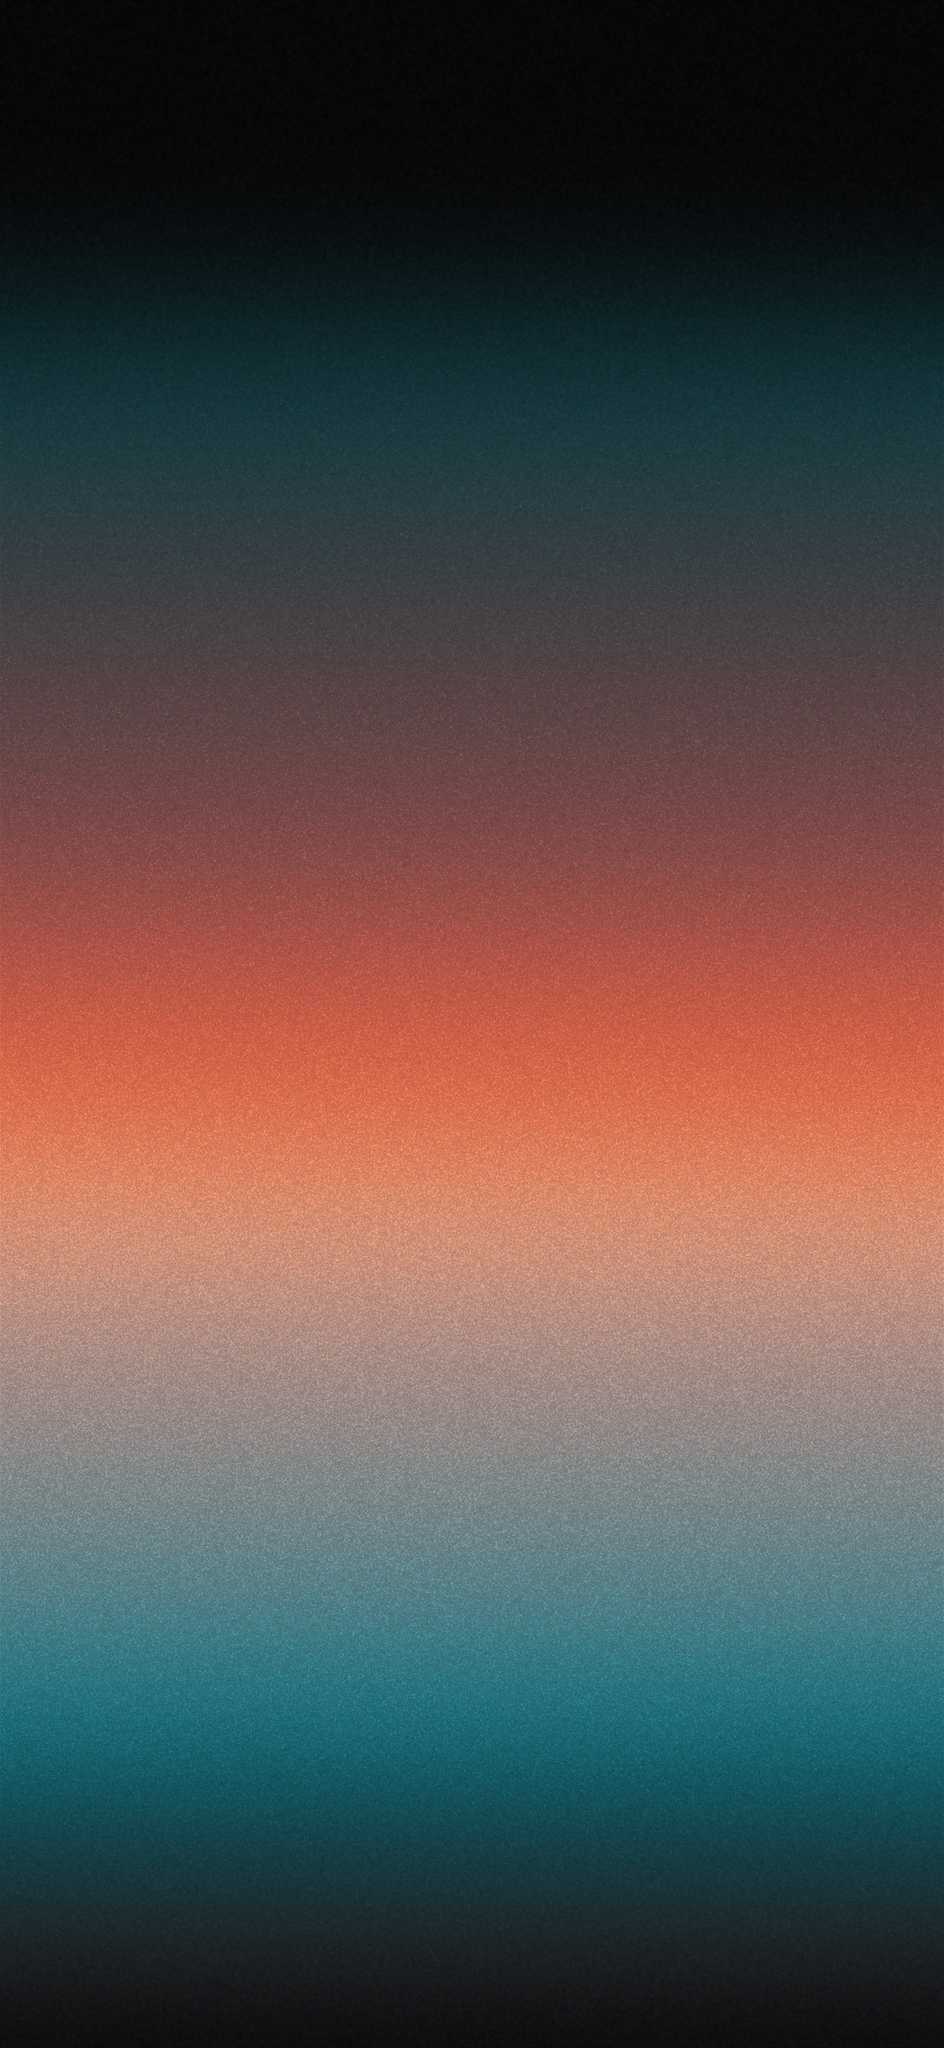 Iphone Wallpaper - KoLPaPer - Awesome Free HD Wallpapers